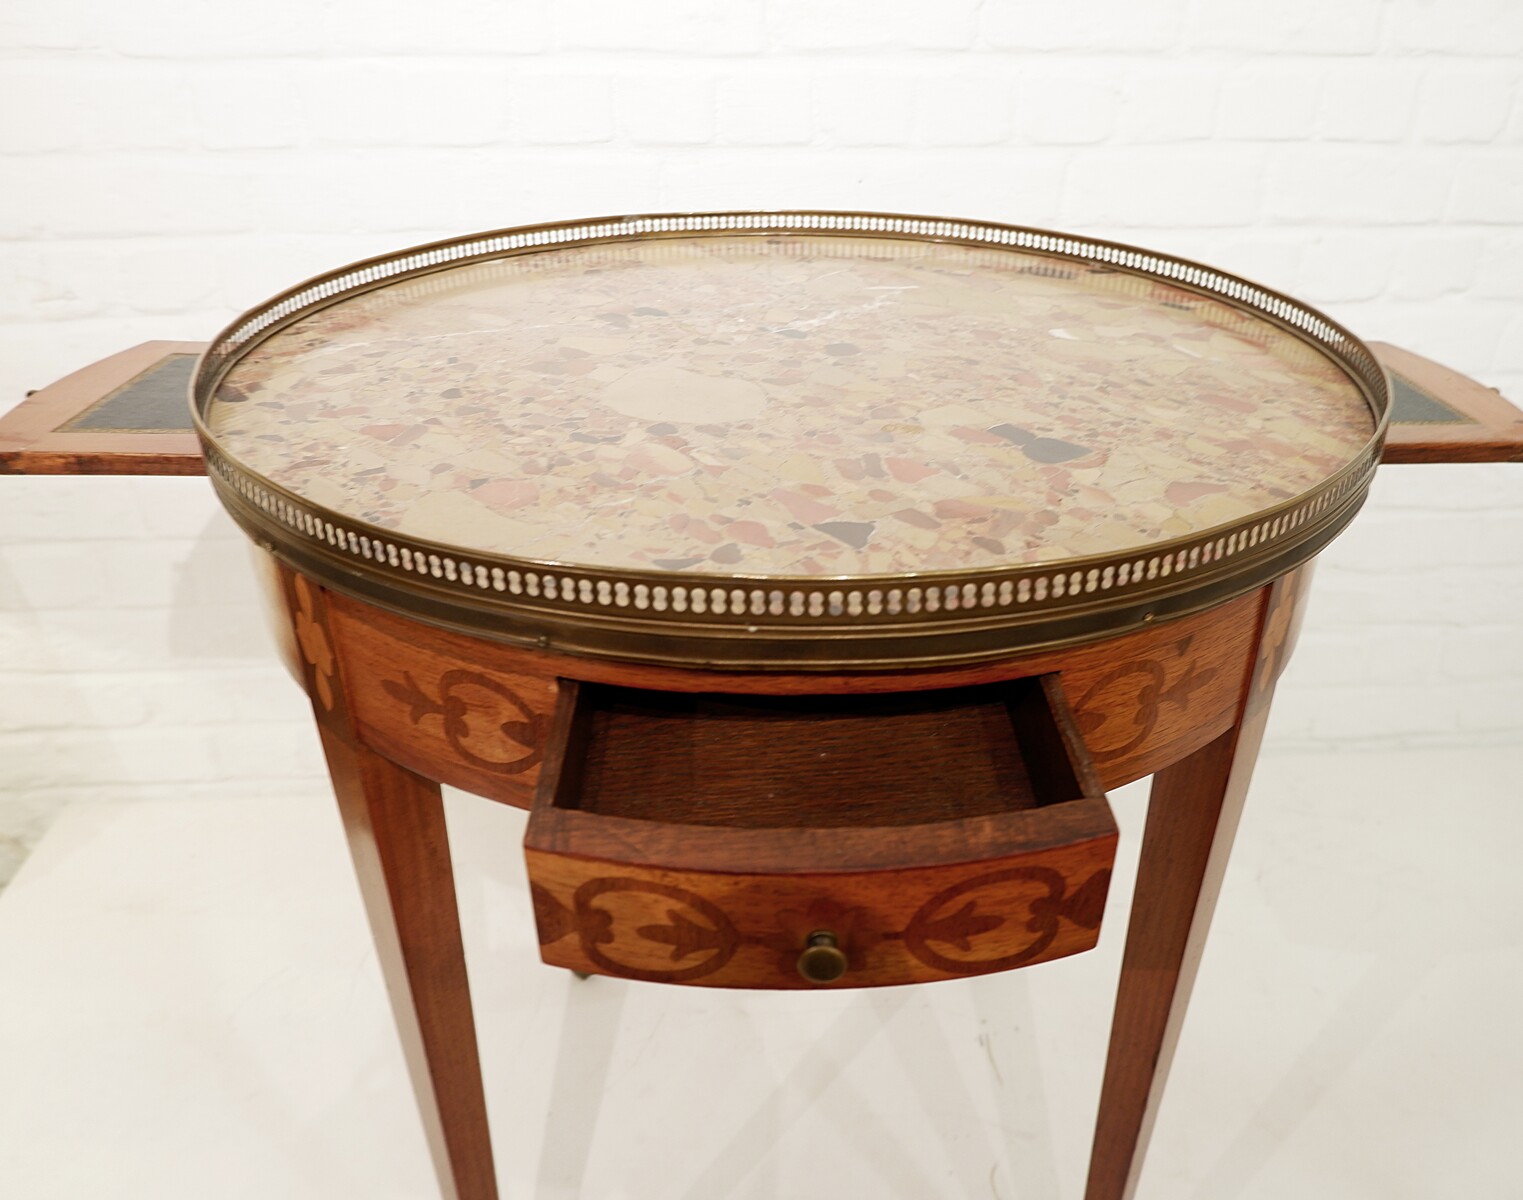 Pedestal table - marquetry and marble -Louis XVI style 